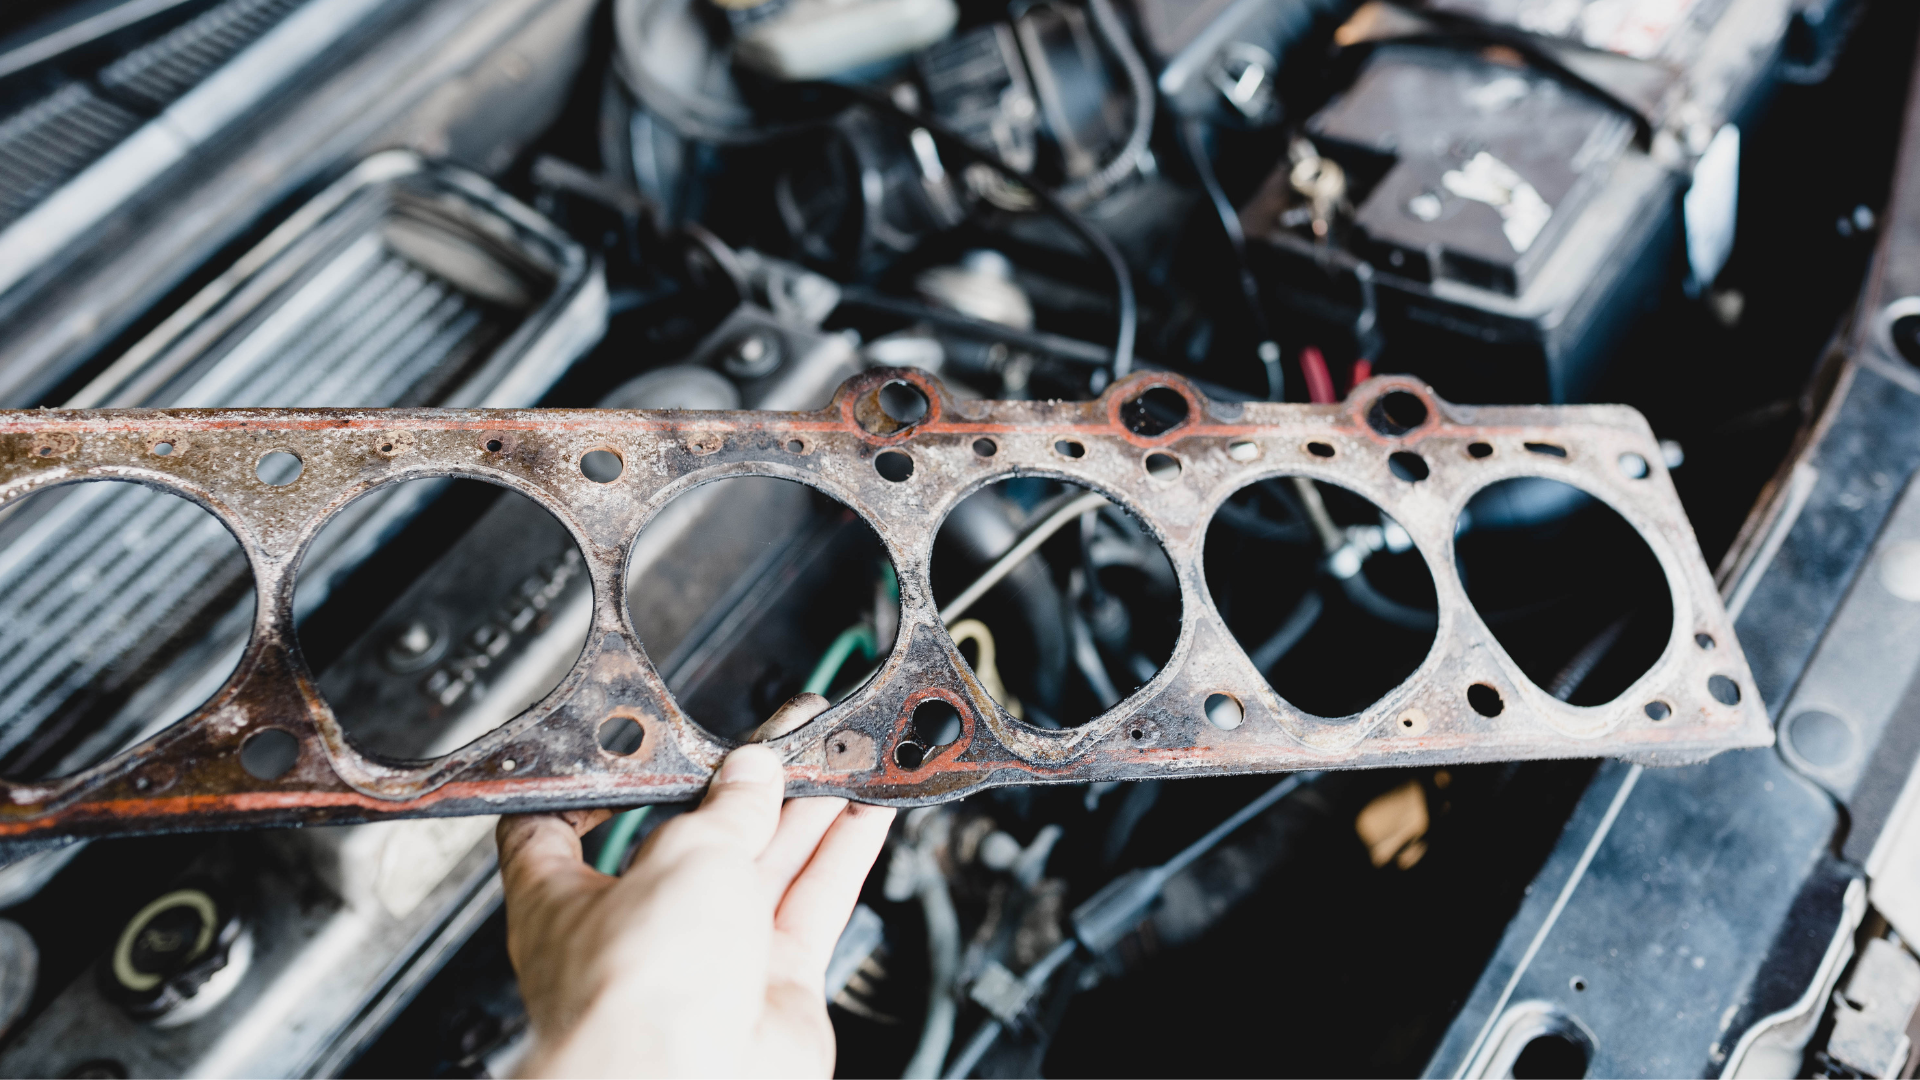 Holding head gasket to replace in engine